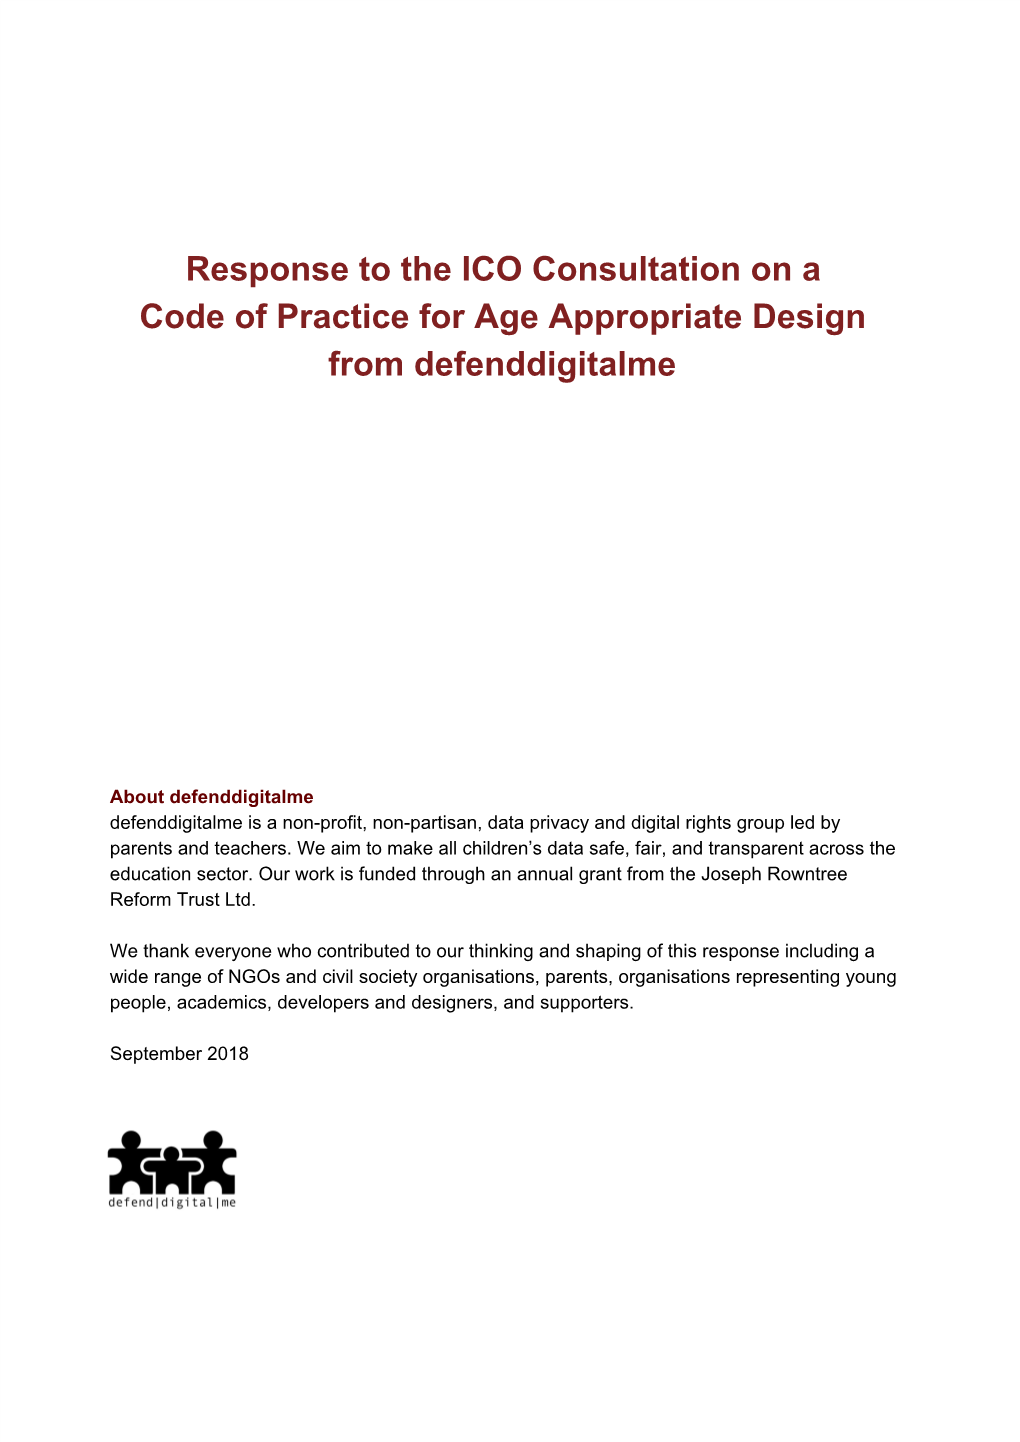 Response to the ICO Consultation on a Code of Practice for Age Appropriate Design from Defenddigitalme